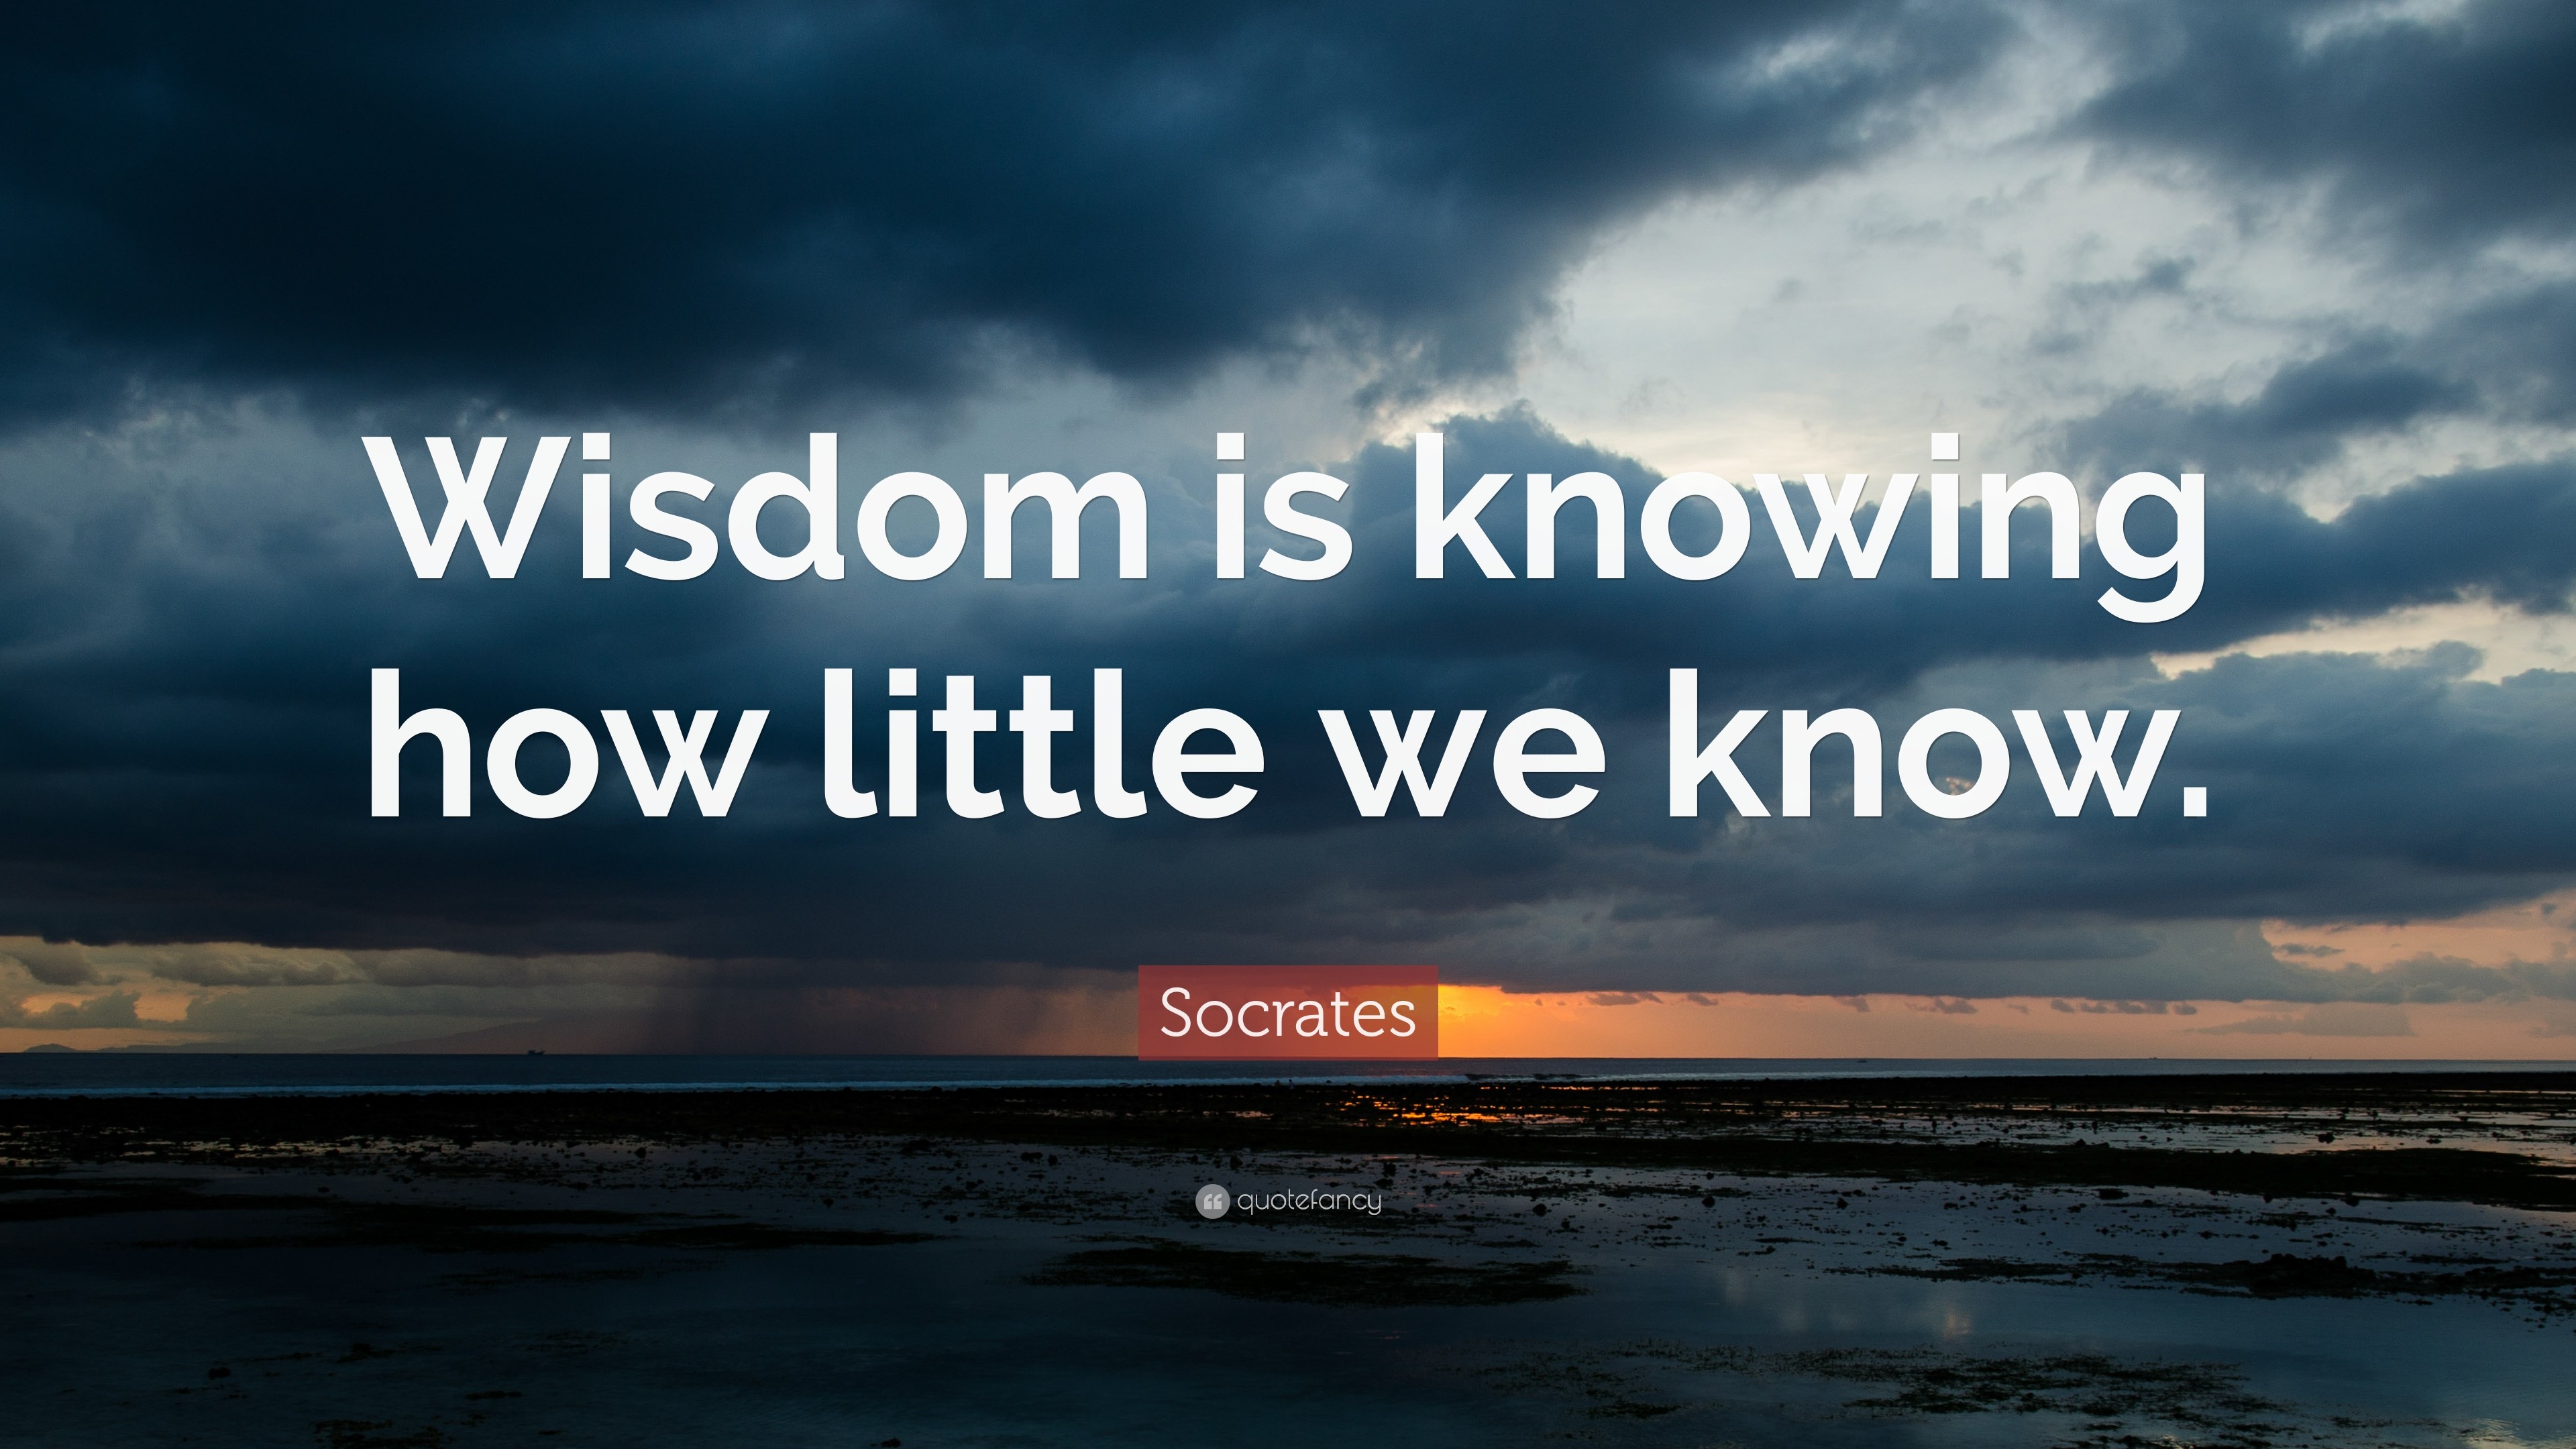 3840x2160 Socrates Quote: “Wisdom is knowing how little we know.”